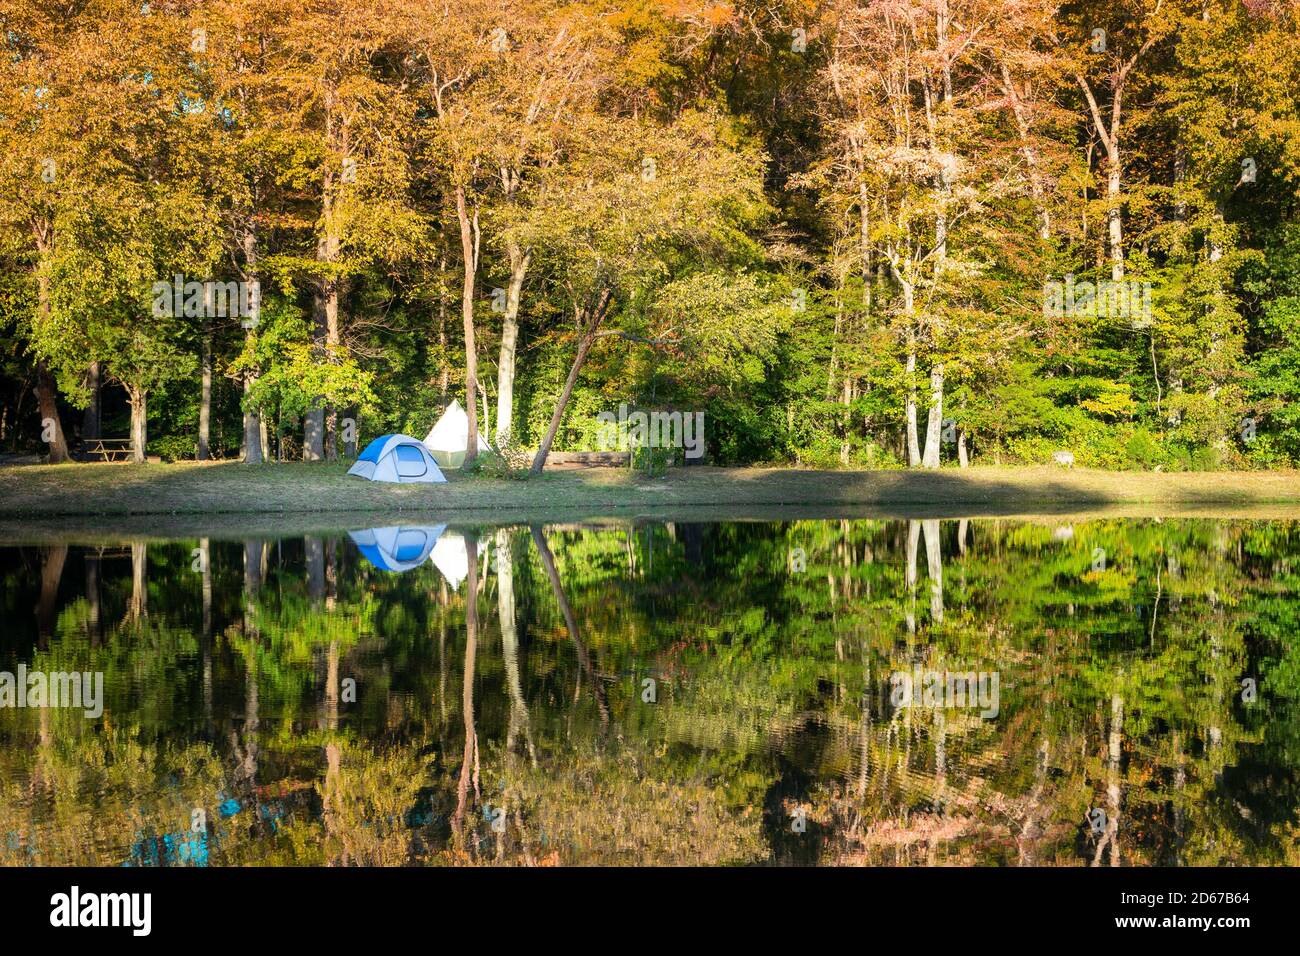 A small campsite by a pond in autumn Stock Photo